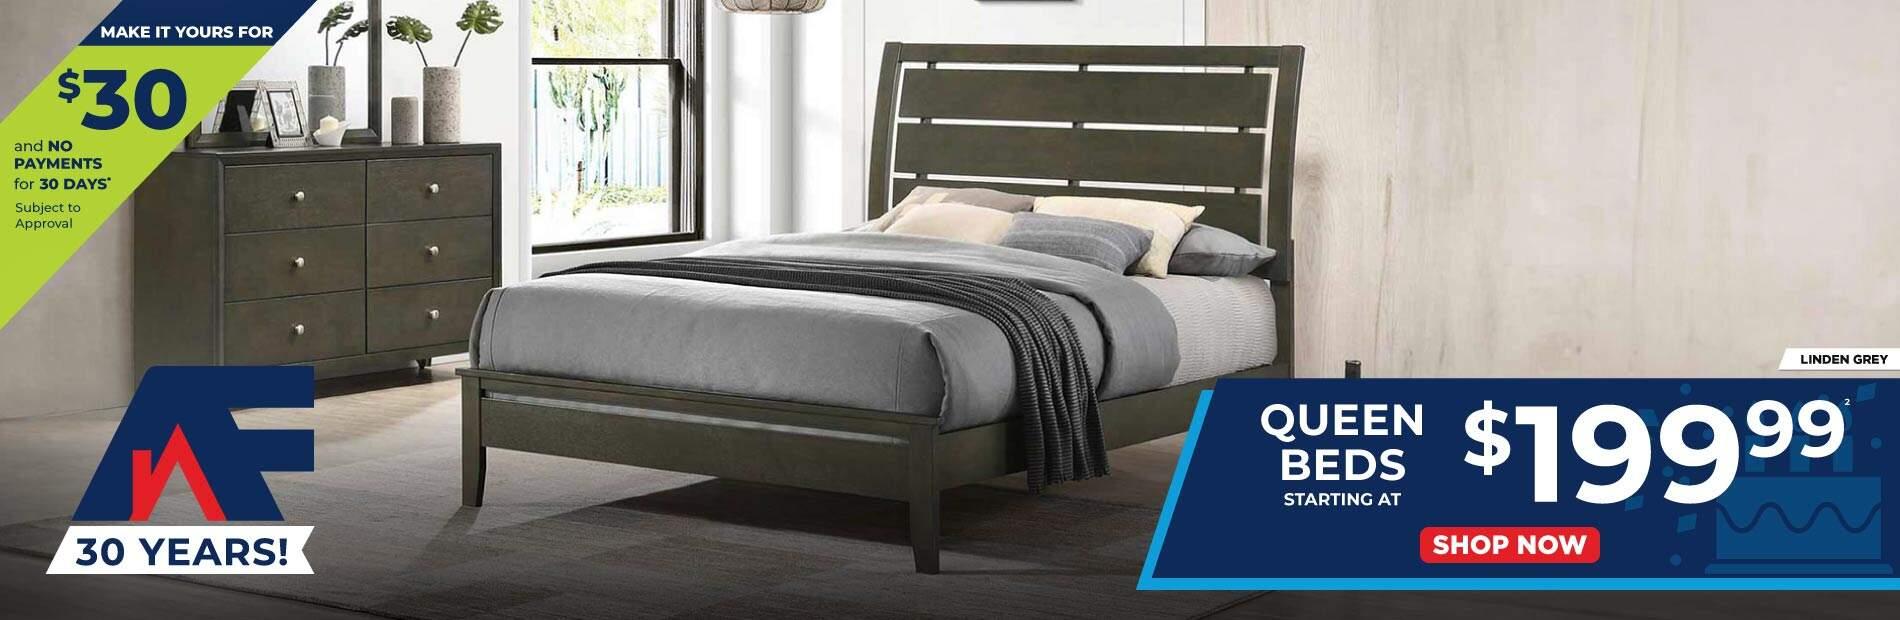 Make it yours $9.99 and no payments for 30 days subject to approval. 30 Years! Queen beds starting at $199.99. 2. Shop Now. Linden Grey